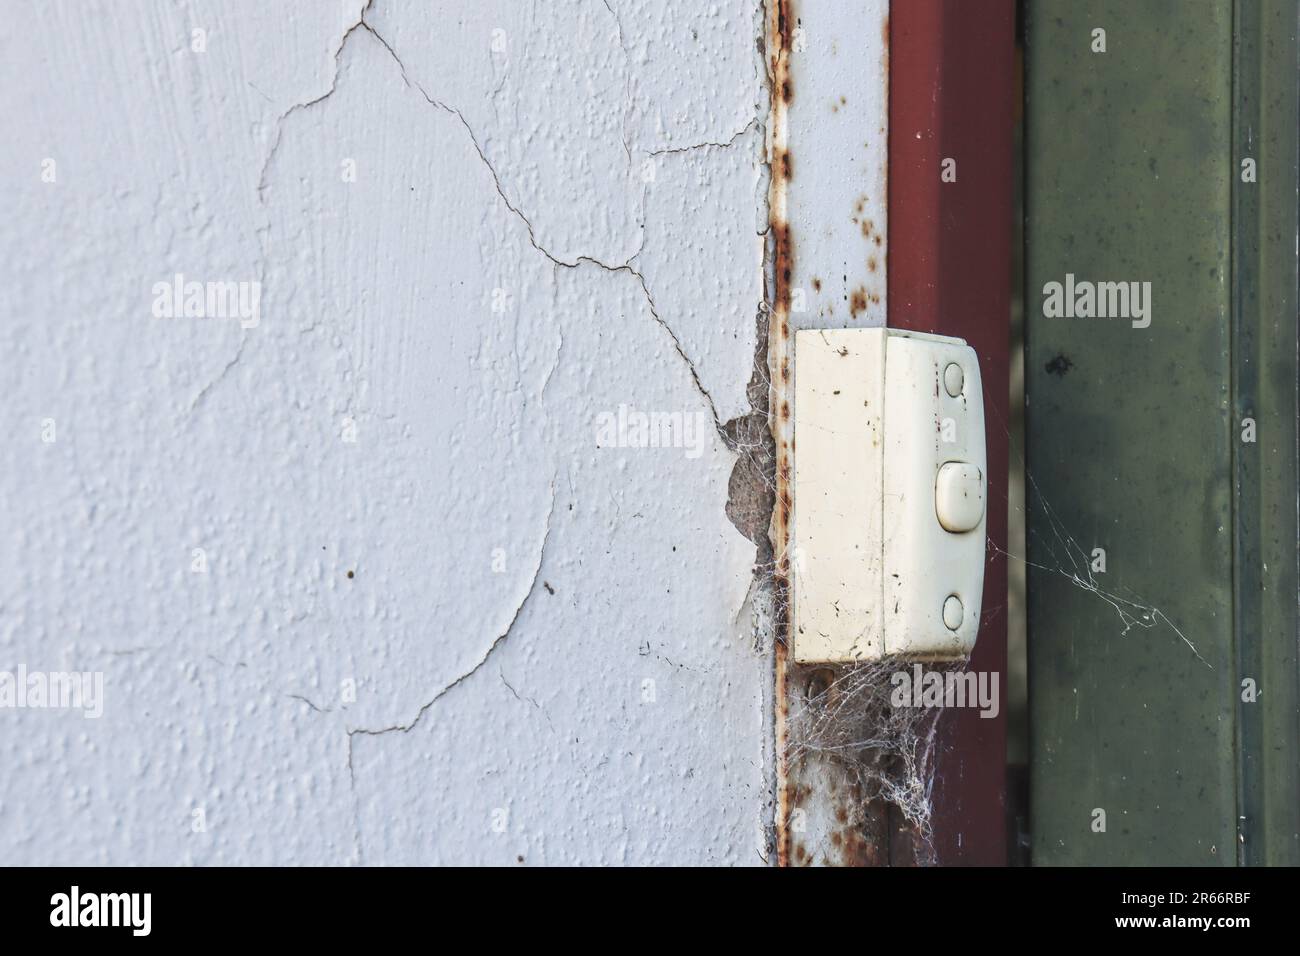 This image is a close-up shot of a doorbell, showing the details of its design and functionality Stock Photo